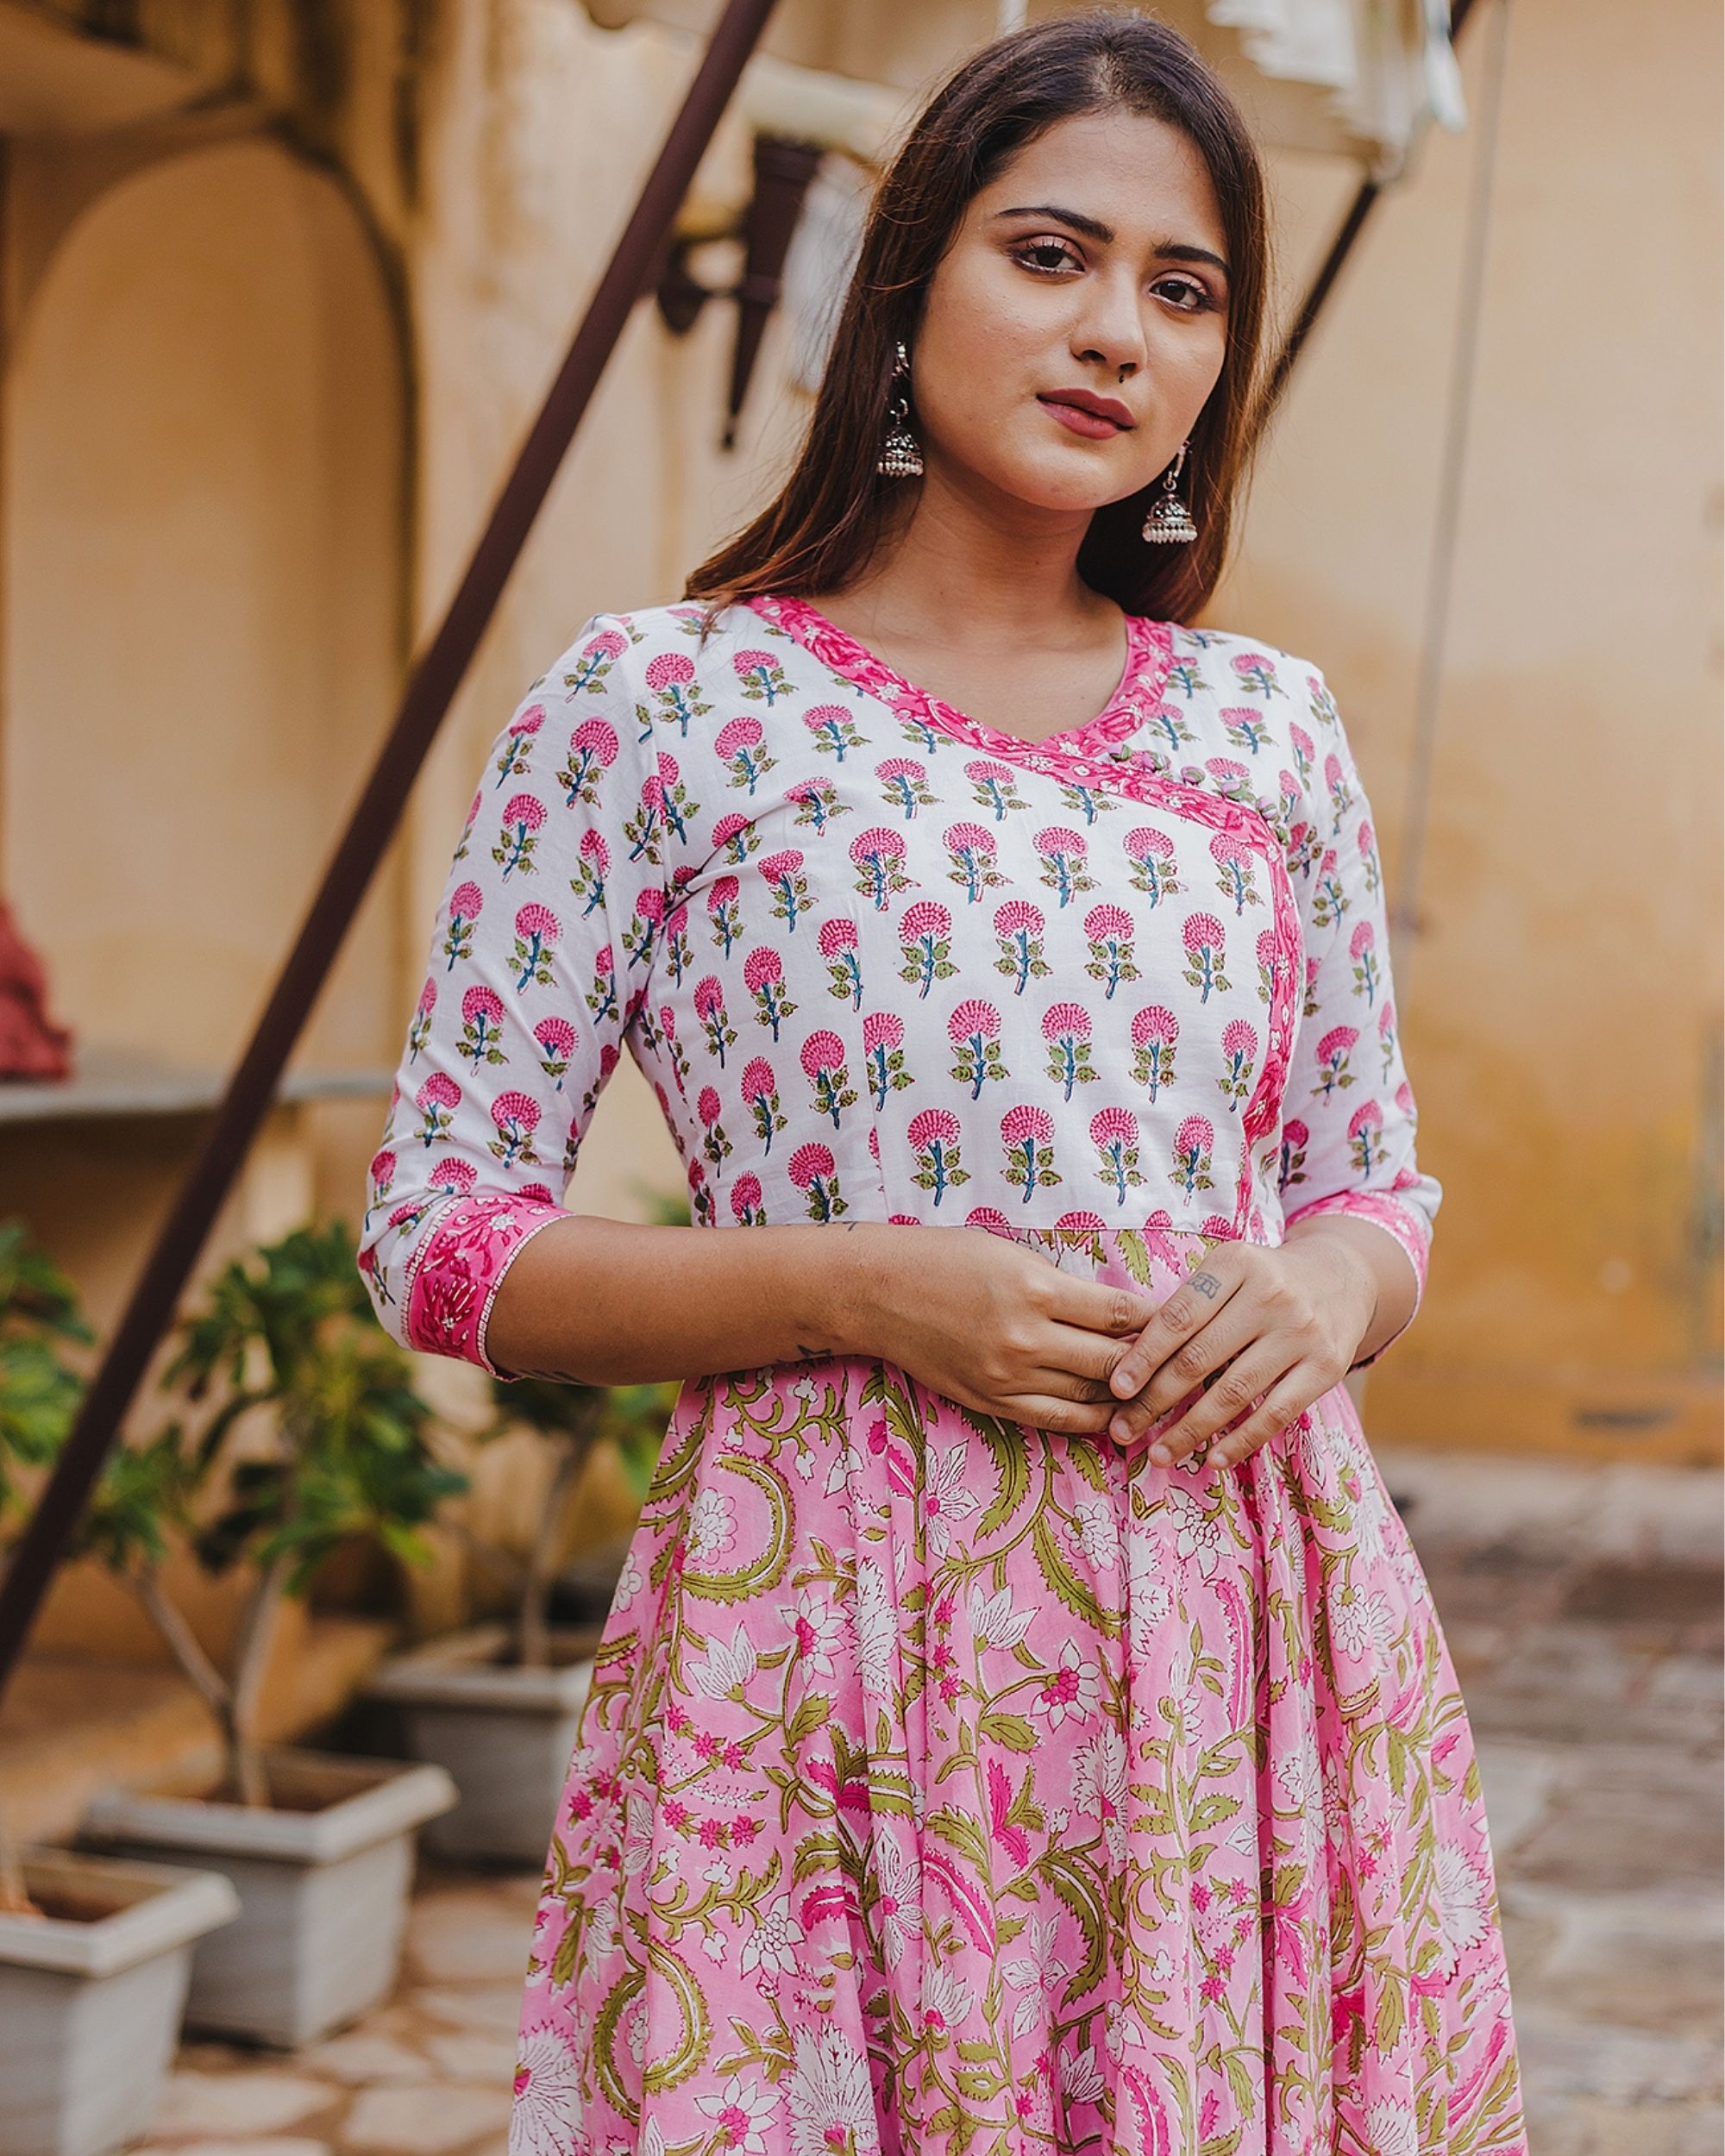 White and pink buti floral dress by Prints Valley | The Secret Label